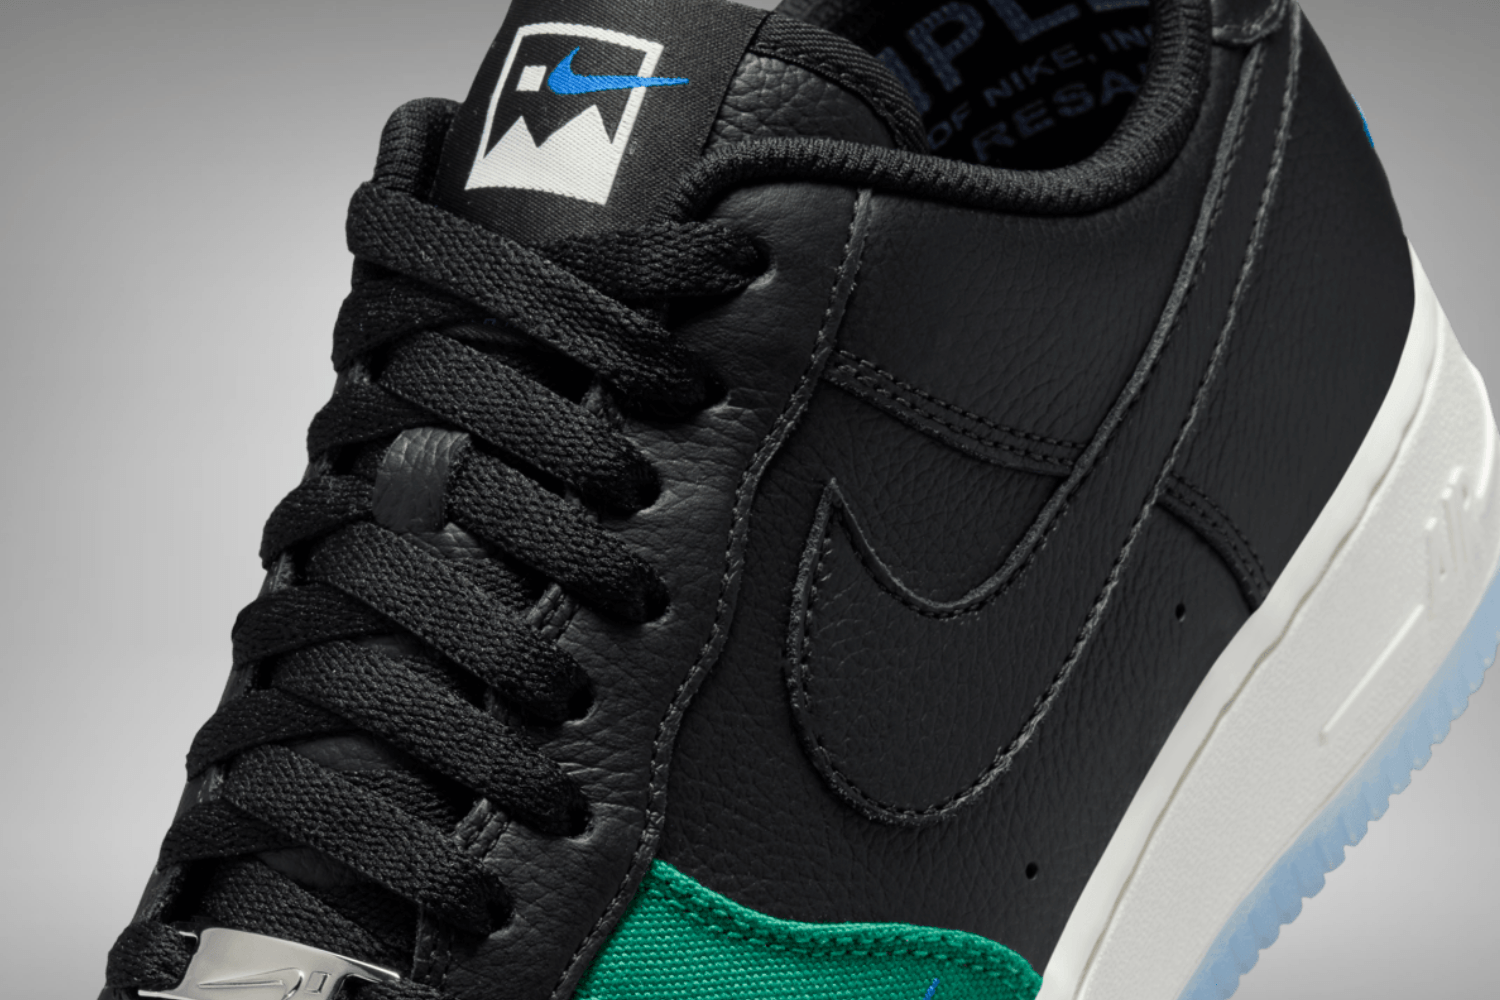 Nike continues .SWOOSH releases with the 'TINAJ B' Air Force 1